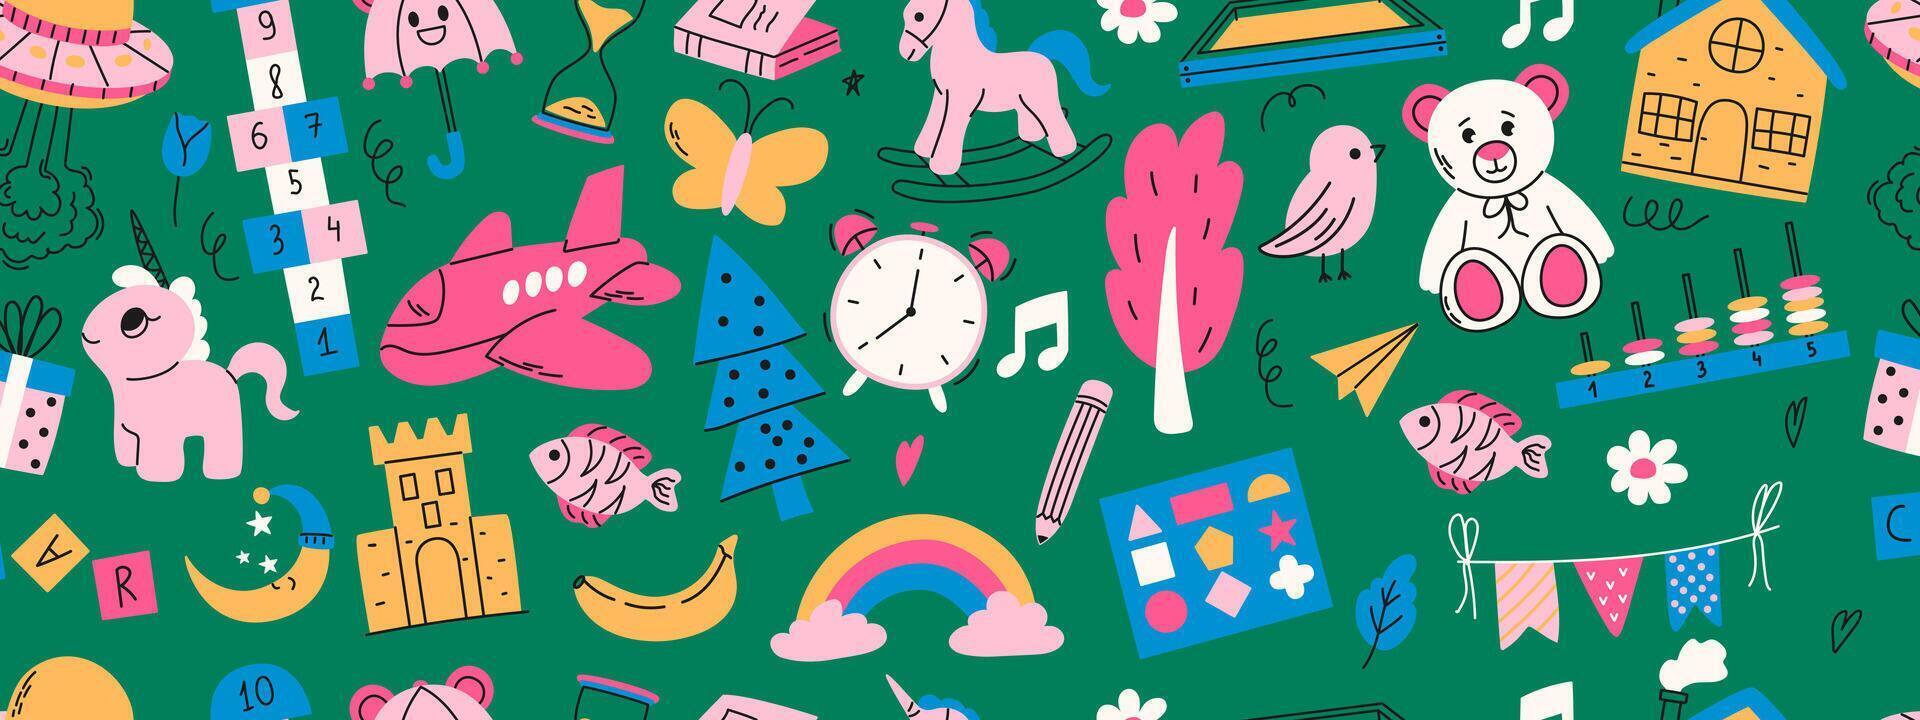 Colorful seamless pattern with daycare doodle. Montessori, hopscotch, toys, flower, umbrella, house, book and other elements. vector